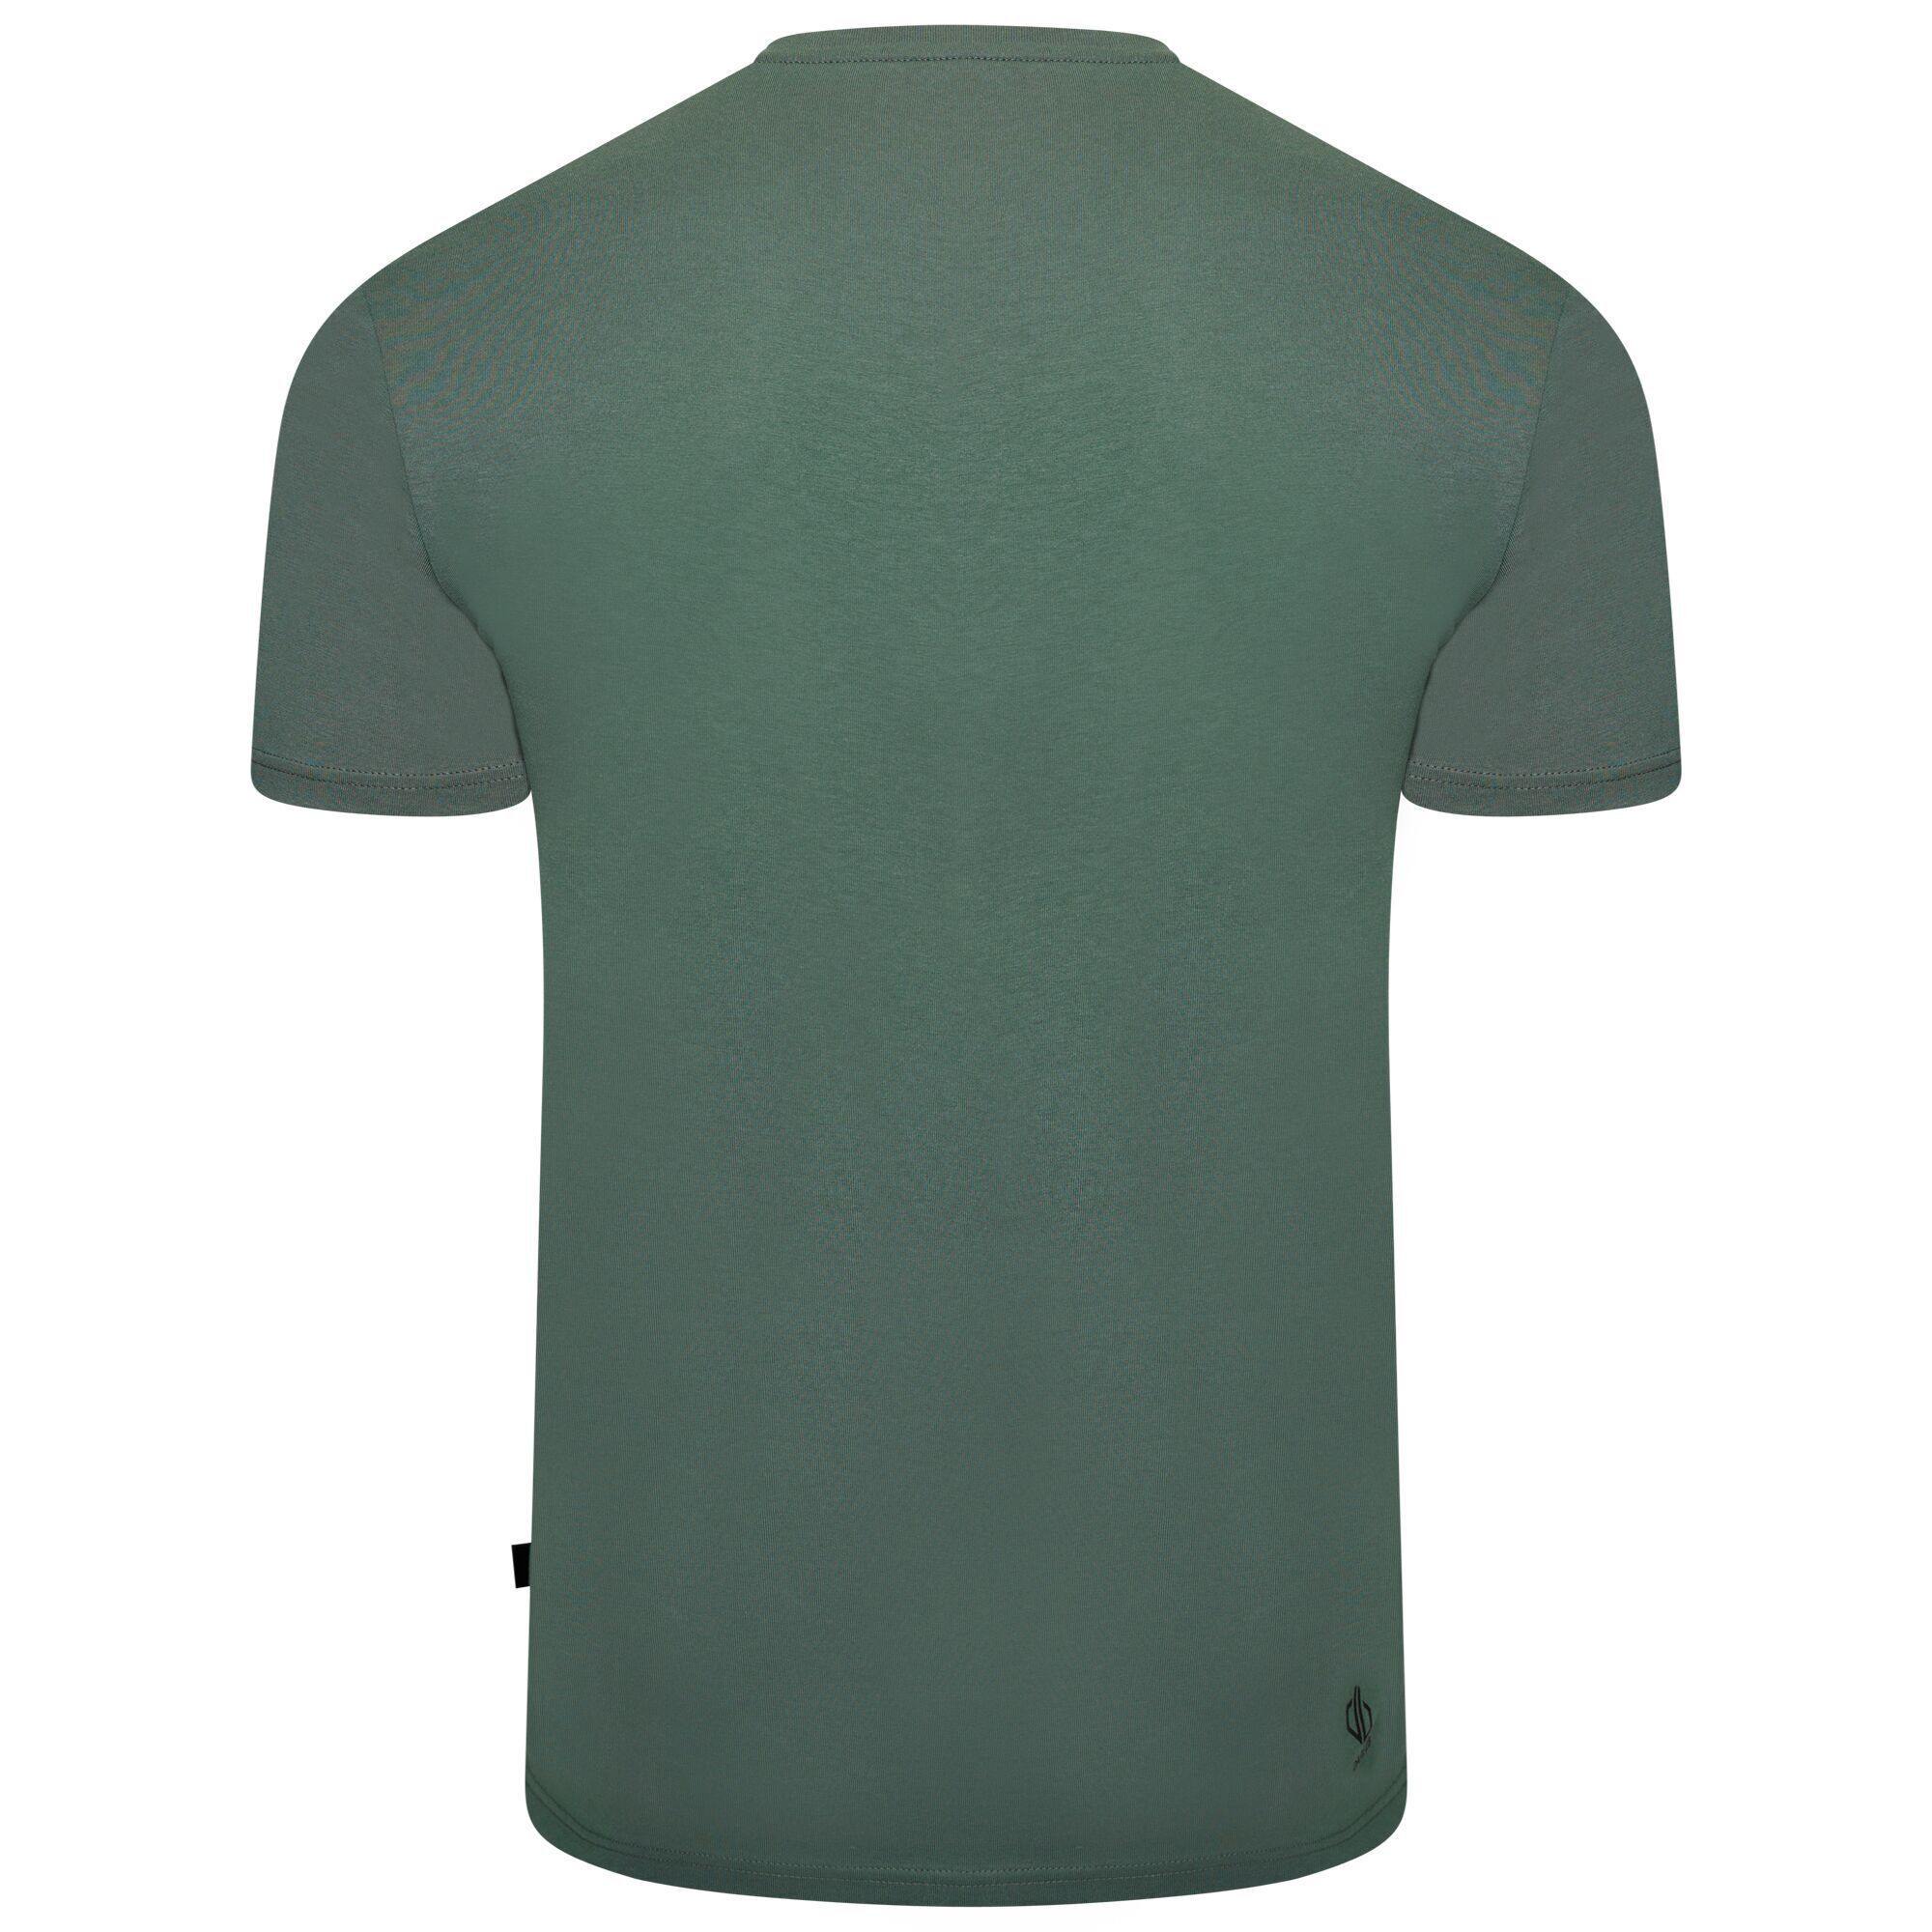 100% Organic Cotton. Fabric: Jersey, Soft Touch. Design: Logo, Plain, Rectangle. Neckline: Crew Neck, Ribbed Collar. Sleeve-Type: Short-Sleeved. Fabric Technology: Breathable, Lightweight.